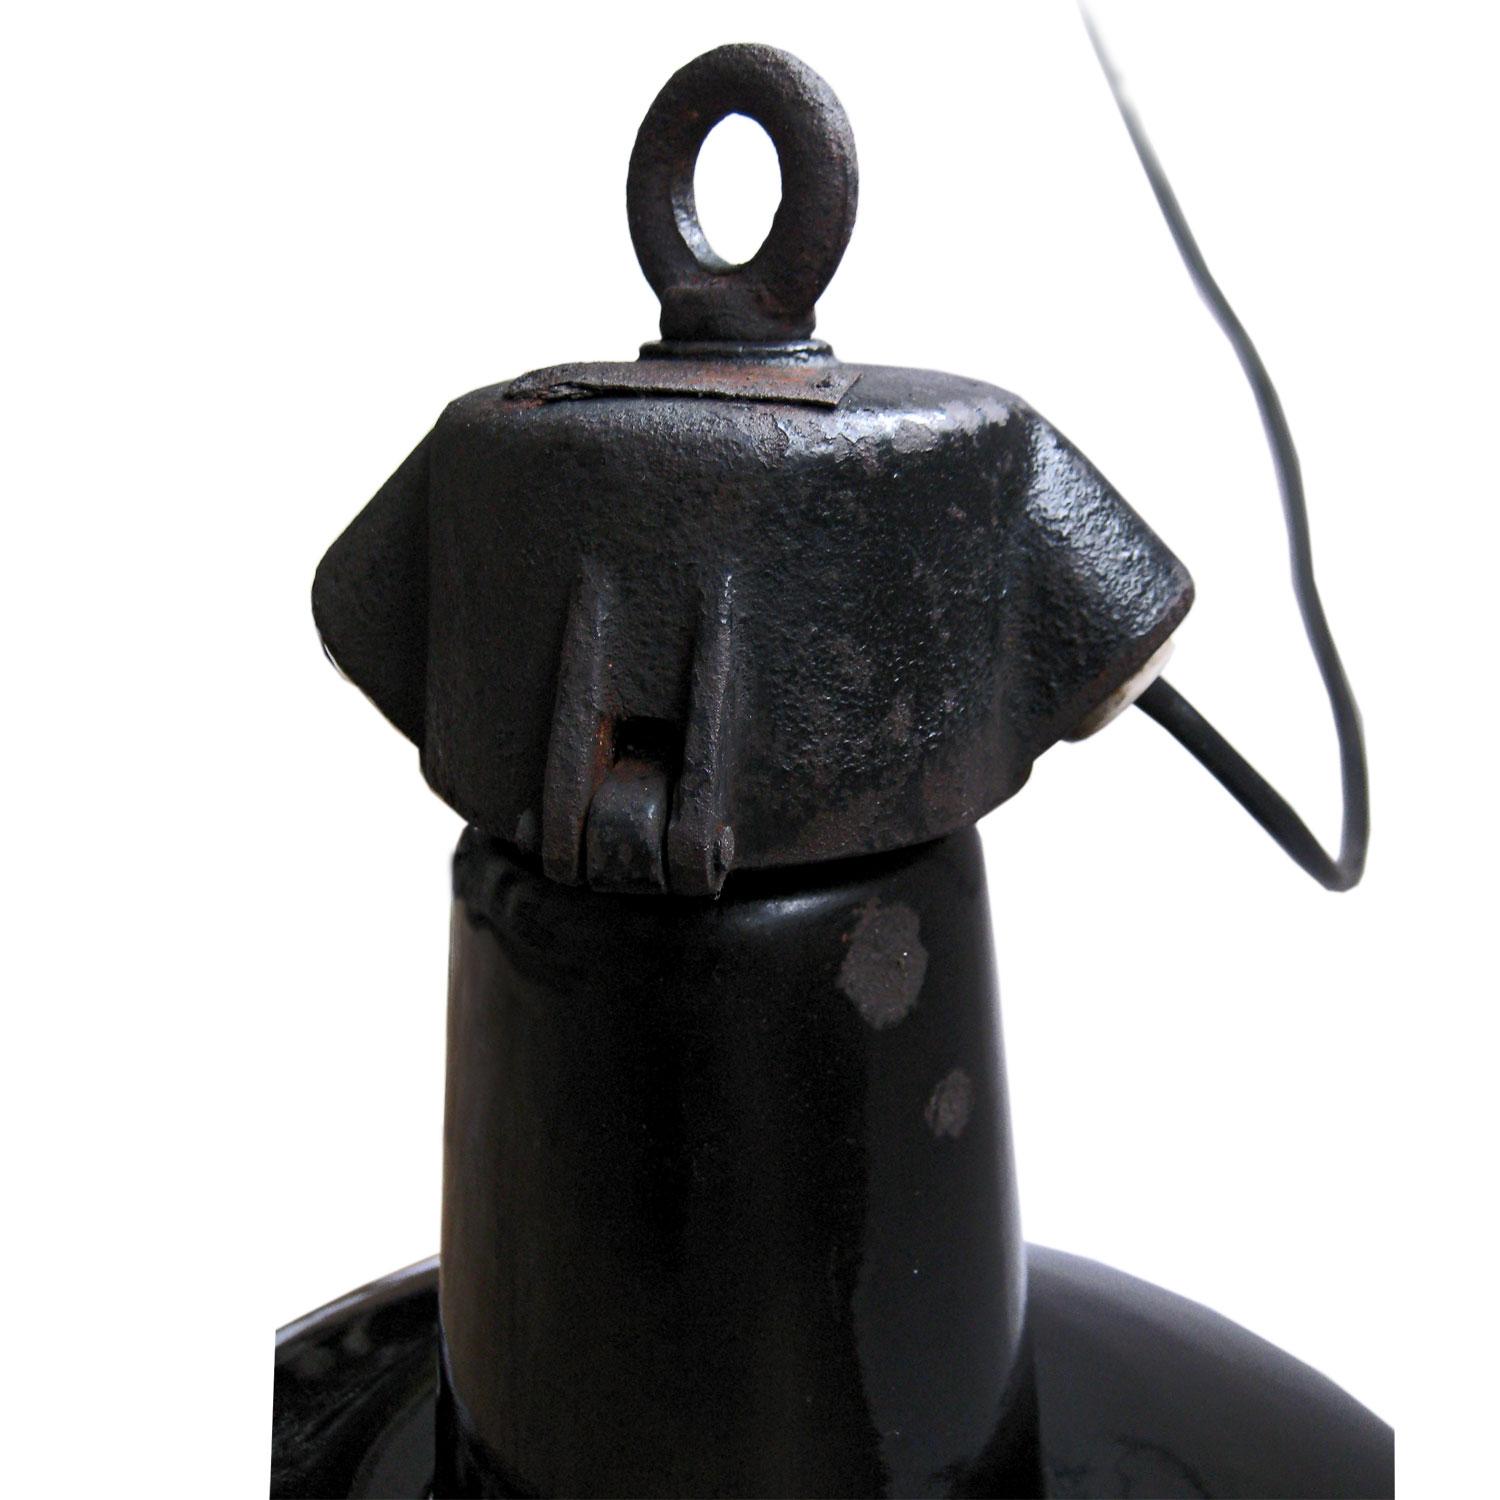 1930s black enamel factory light. Cast iron top.

Weight: 2.0 kg / 4.4 lb

Priced per individual item. All lamps have been made suitable by international standards for incandescent light bulbs, energy-efficient and LED bulbs. The new wiring is CE